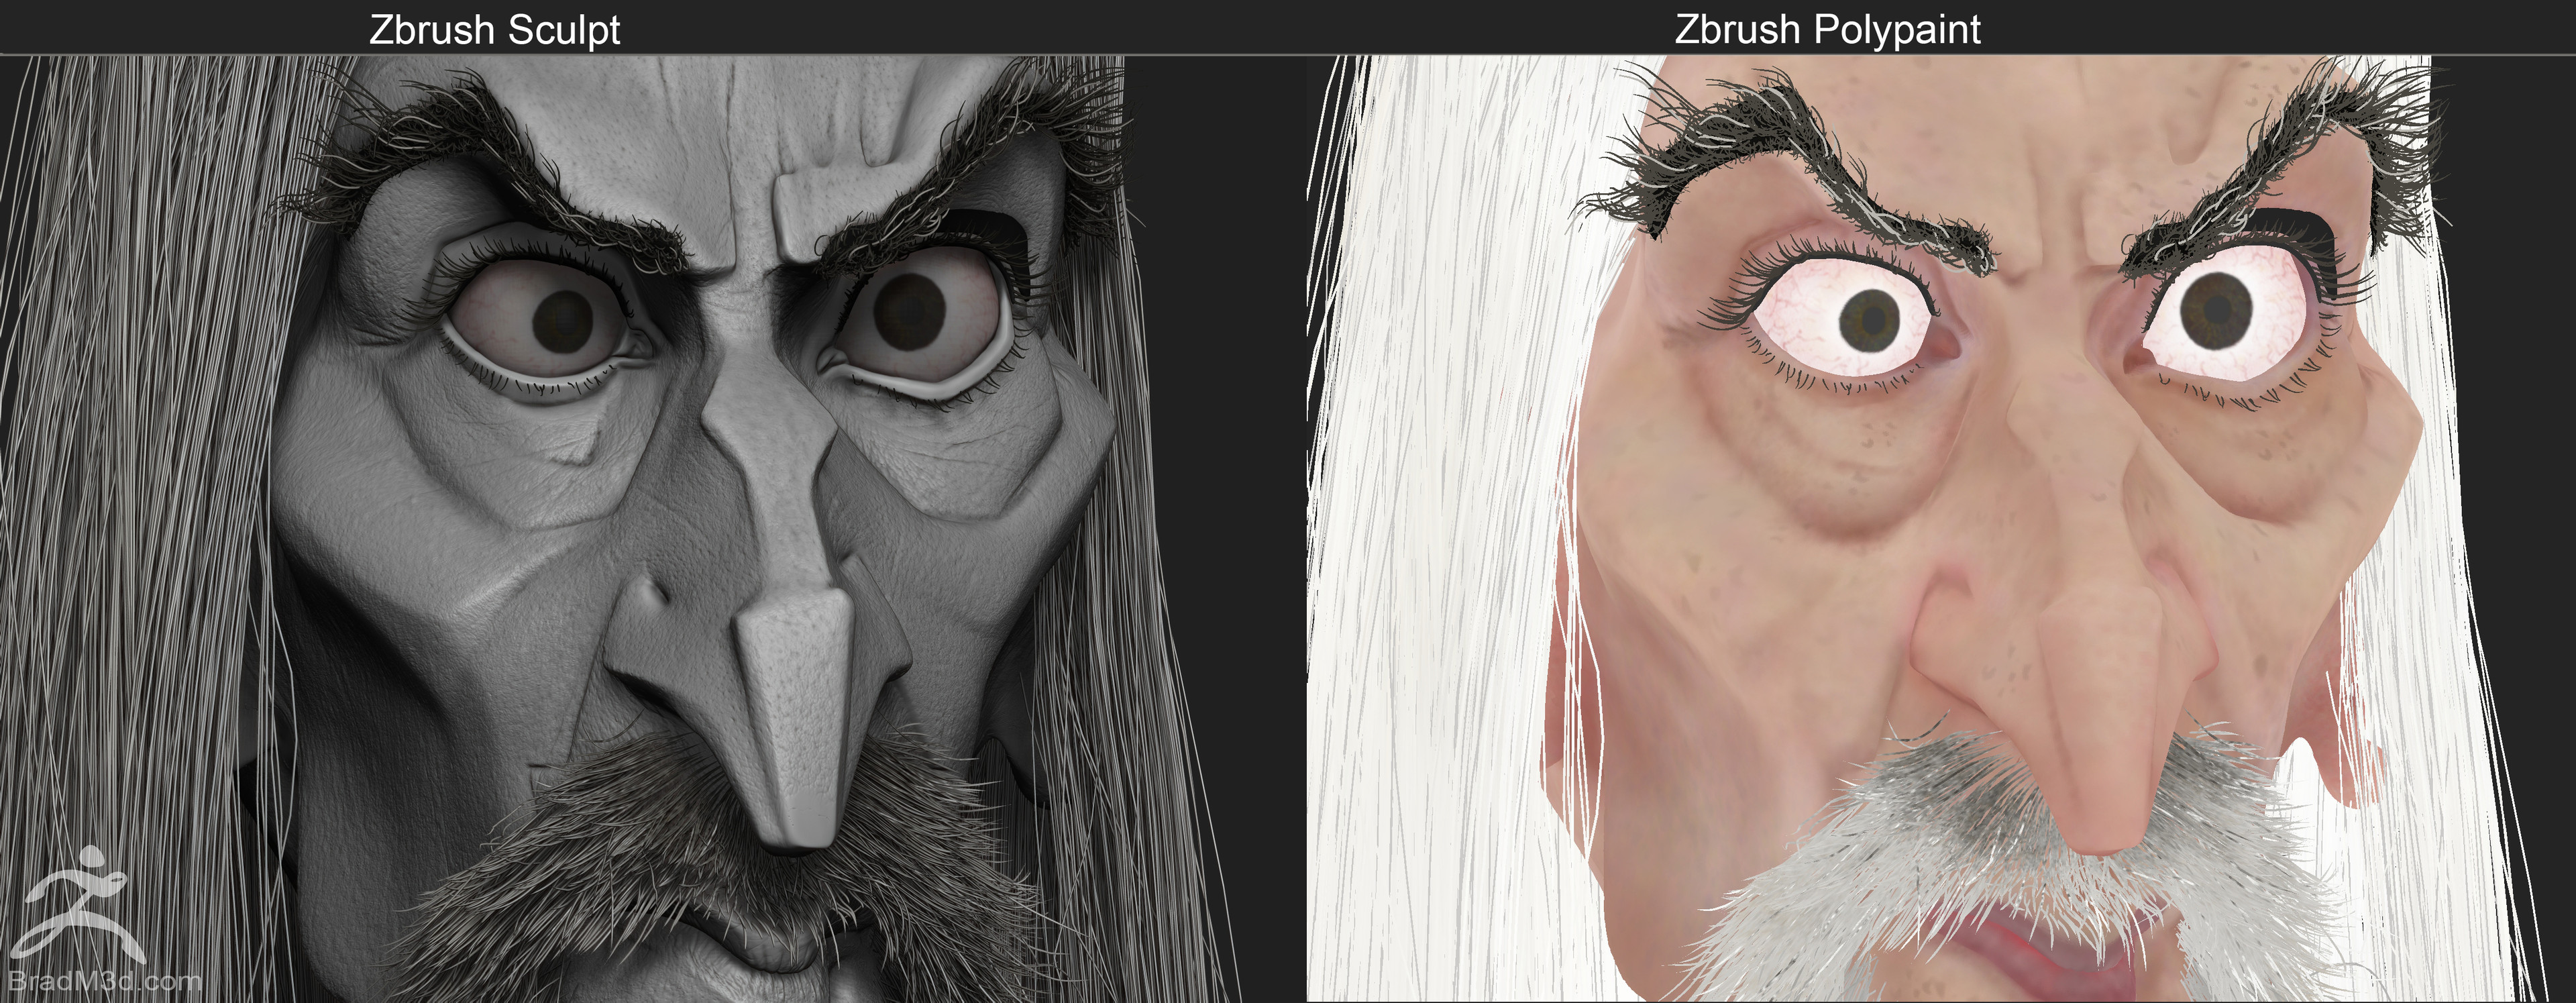 Simple Zbrush Sculpt BPR Render Closeup, and Flat Shaded polypaint demo